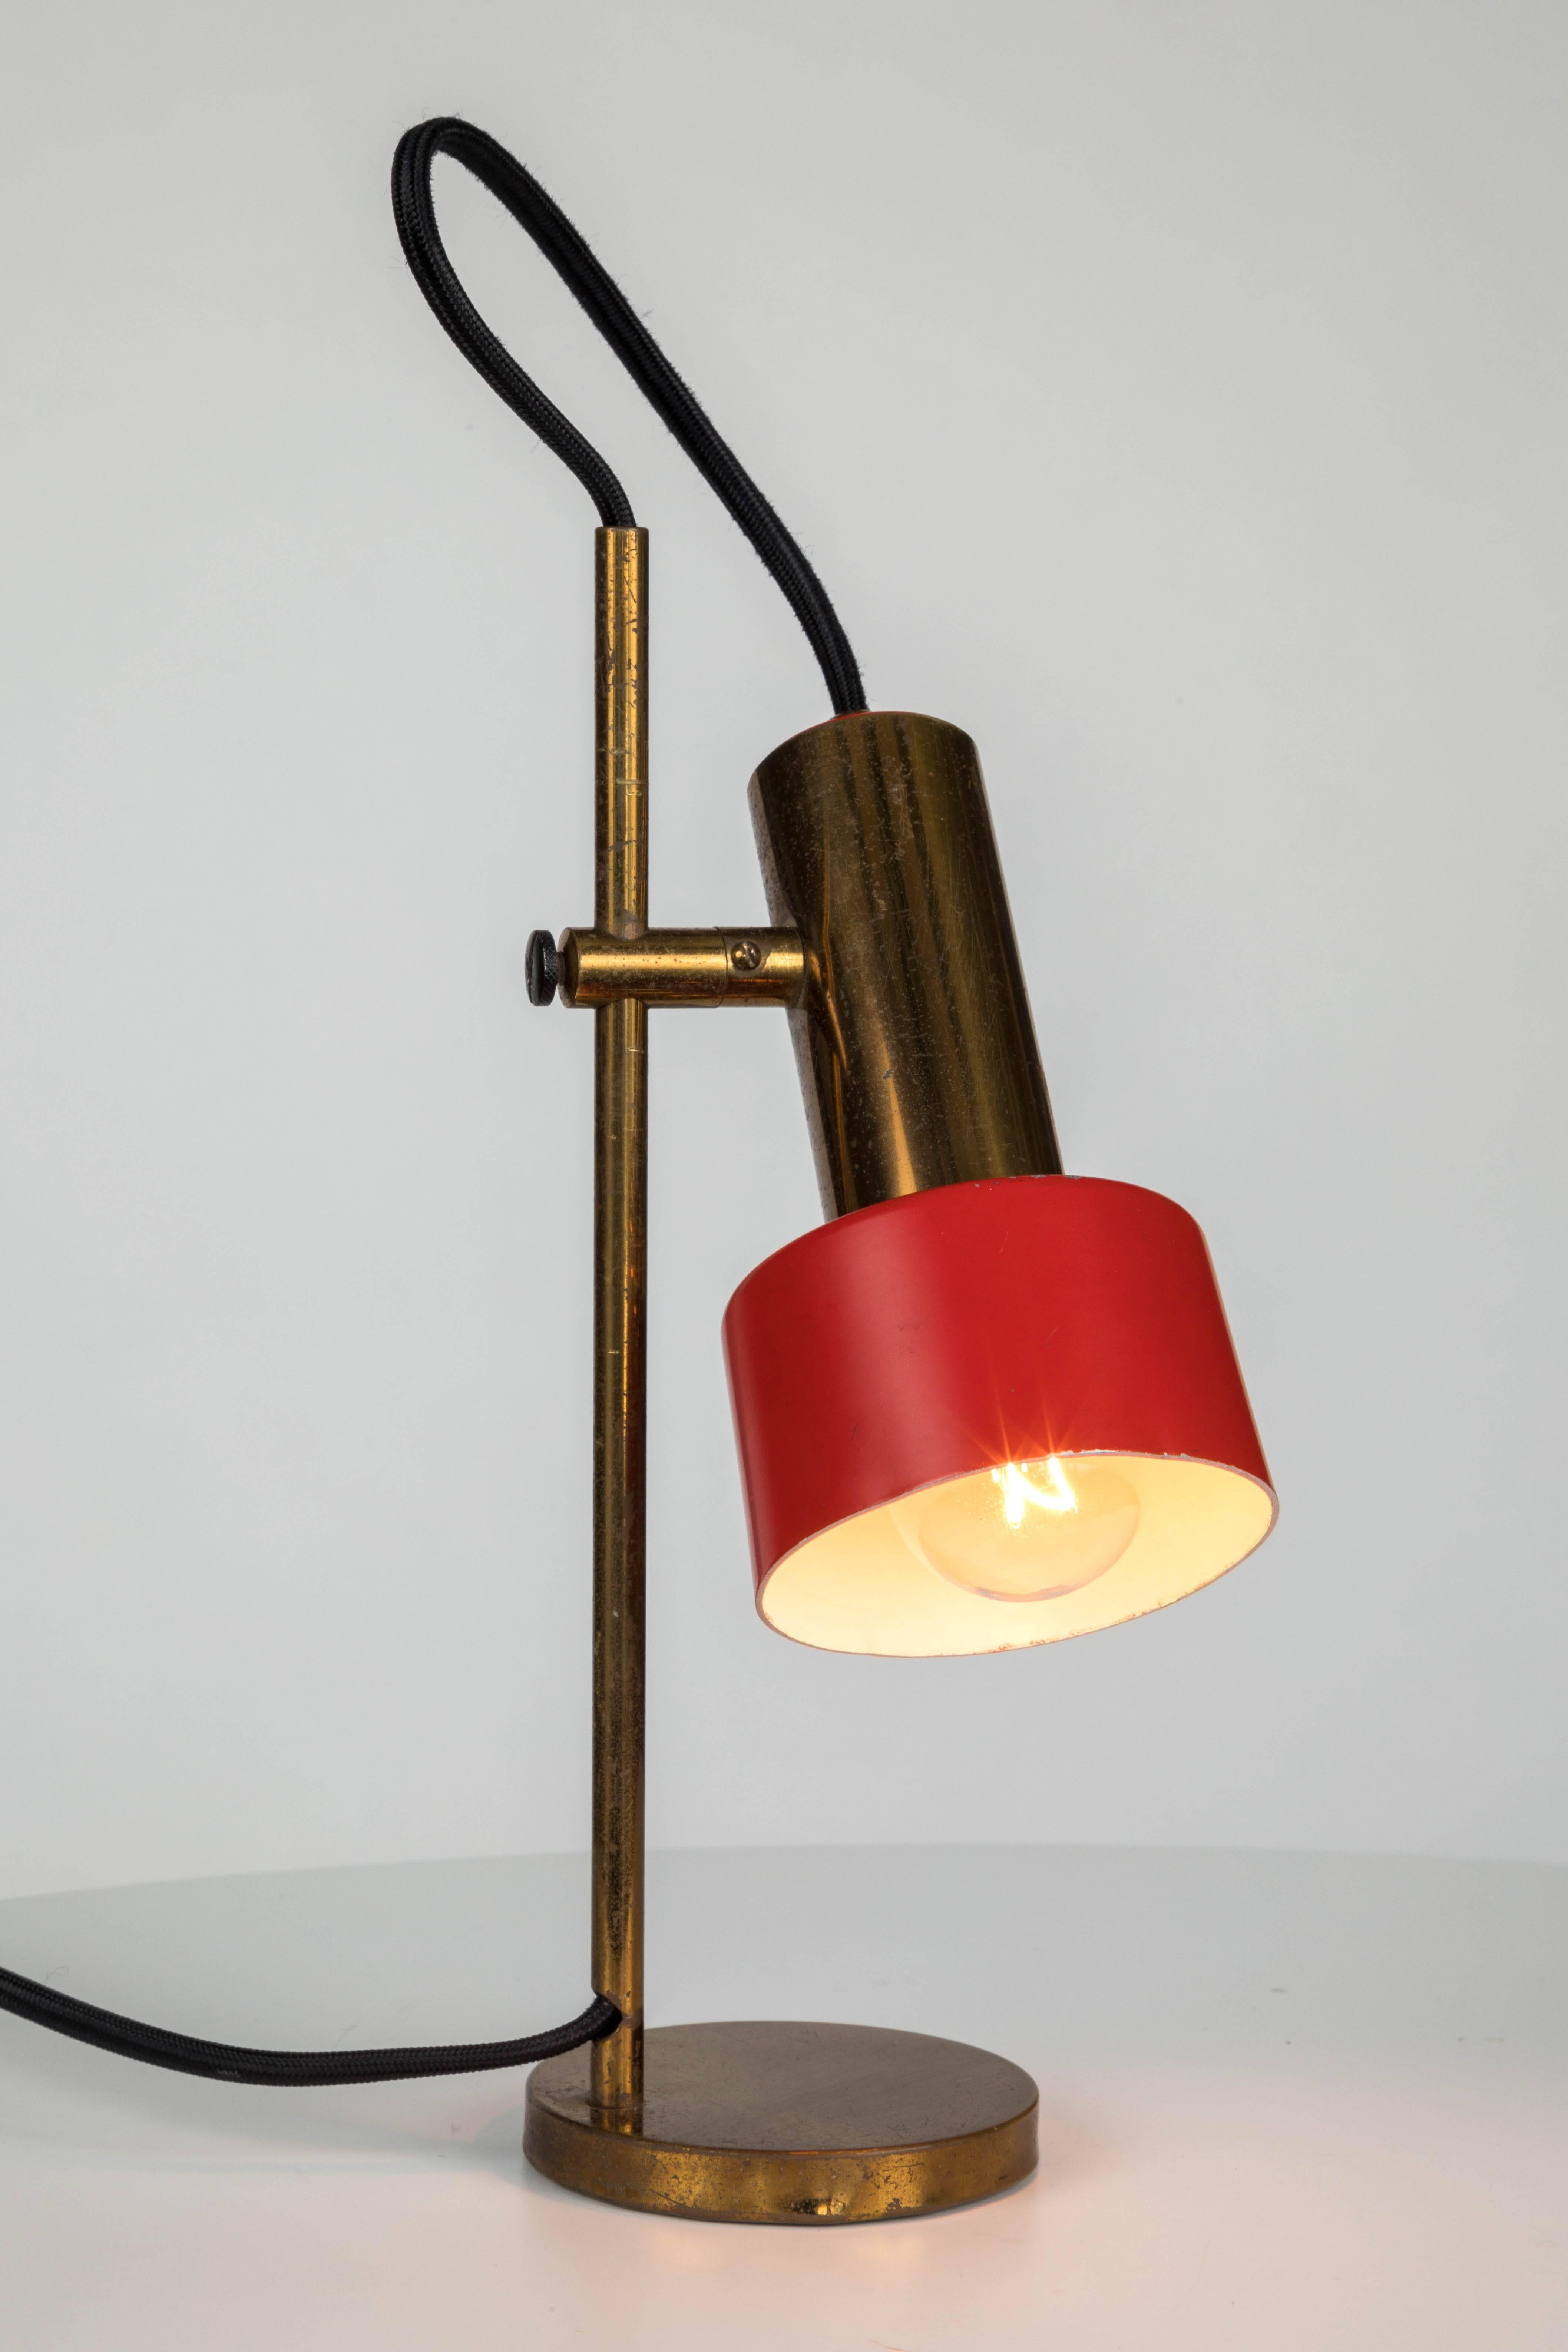 1950s brass table lamp by Casey Fantin. This petite classic design is executed in lightly patinated brass and red painted metal with original color in good vintage condition. Shade can rotate from side to side and be moved up or down.

Fantin was